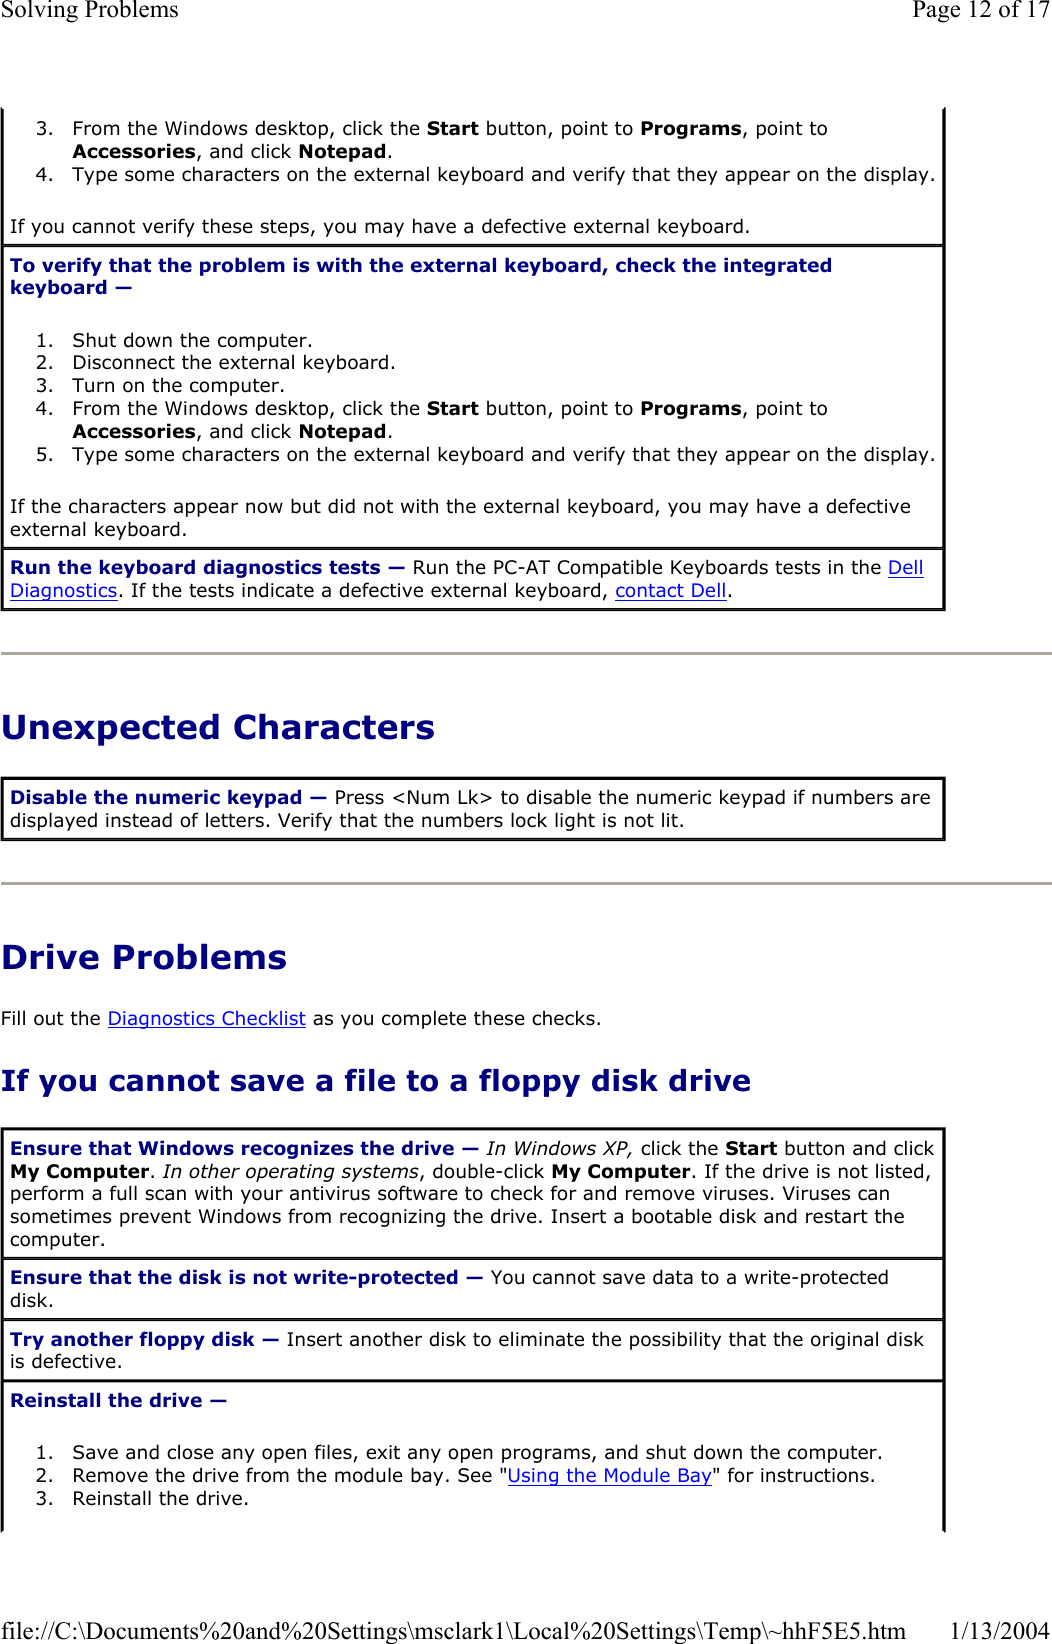 Unexpected Characters Drive Problems Fill out the Diagnostics Checklist as you complete these checks. If you cannot save a file to a floppy disk drive 3. From the Windows desktop, click the Start button, point to Programs, point to Accessories, and click Notepad.4. Type some characters on the external keyboard and verify that they appear on the display. If you cannot verify these steps, you may have a defective external keyboard.  To verify that the problem is with the external keyboard, check the integrated keyboard —1. Shut down the computer.  2. Disconnect the external keyboard.  3. Turn on the computer.  4. From the Windows desktop, click the Start button, point to Programs, point to Accessories, and click Notepad.5. Type some characters on the external keyboard and verify that they appear on the display. If the characters appear now but did not with the external keyboard, you may have a defective external keyboard.  Run the keyboard diagnostics tests — Run the PC-AT Compatible Keyboards tests in the DellDiagnostics. If the tests indicate a defective external keyboard, contact Dell.Disable the numeric keypad — Press &lt;Num Lk&gt; to disable the numeric keypad if numbers are displayed instead of letters. Verify that the numbers lock light is not lit. Ensure that Windows recognizes the drive — In Windows XP, click the Start button and click My Computer.In other operating systems, double-click My Computer. If the drive is not listed, perform a full scan with your antivirus software to check for and remove viruses. Viruses can sometimes prevent Windows from recognizing the drive. Insert a bootable disk and restart the computer. Ensure that the disk is not write-protected — You cannot save data to a write-protected disk.  Try another floppy disk — Insert another disk to eliminate the possibility that the original disk is defective. Reinstall the drive —1. Save and close any open files, exit any open programs, and shut down the computer.  2. Remove the drive from the module bay. See &quot;Using the Module Bay&quot; for instructions.  3. Reinstall the drive.  Page 12 of 17Solving Problems1/13/2004file://C:\Documents%20and%20Settings\msclark1\Local%20Settings\Temp\~hhF5E5.htm